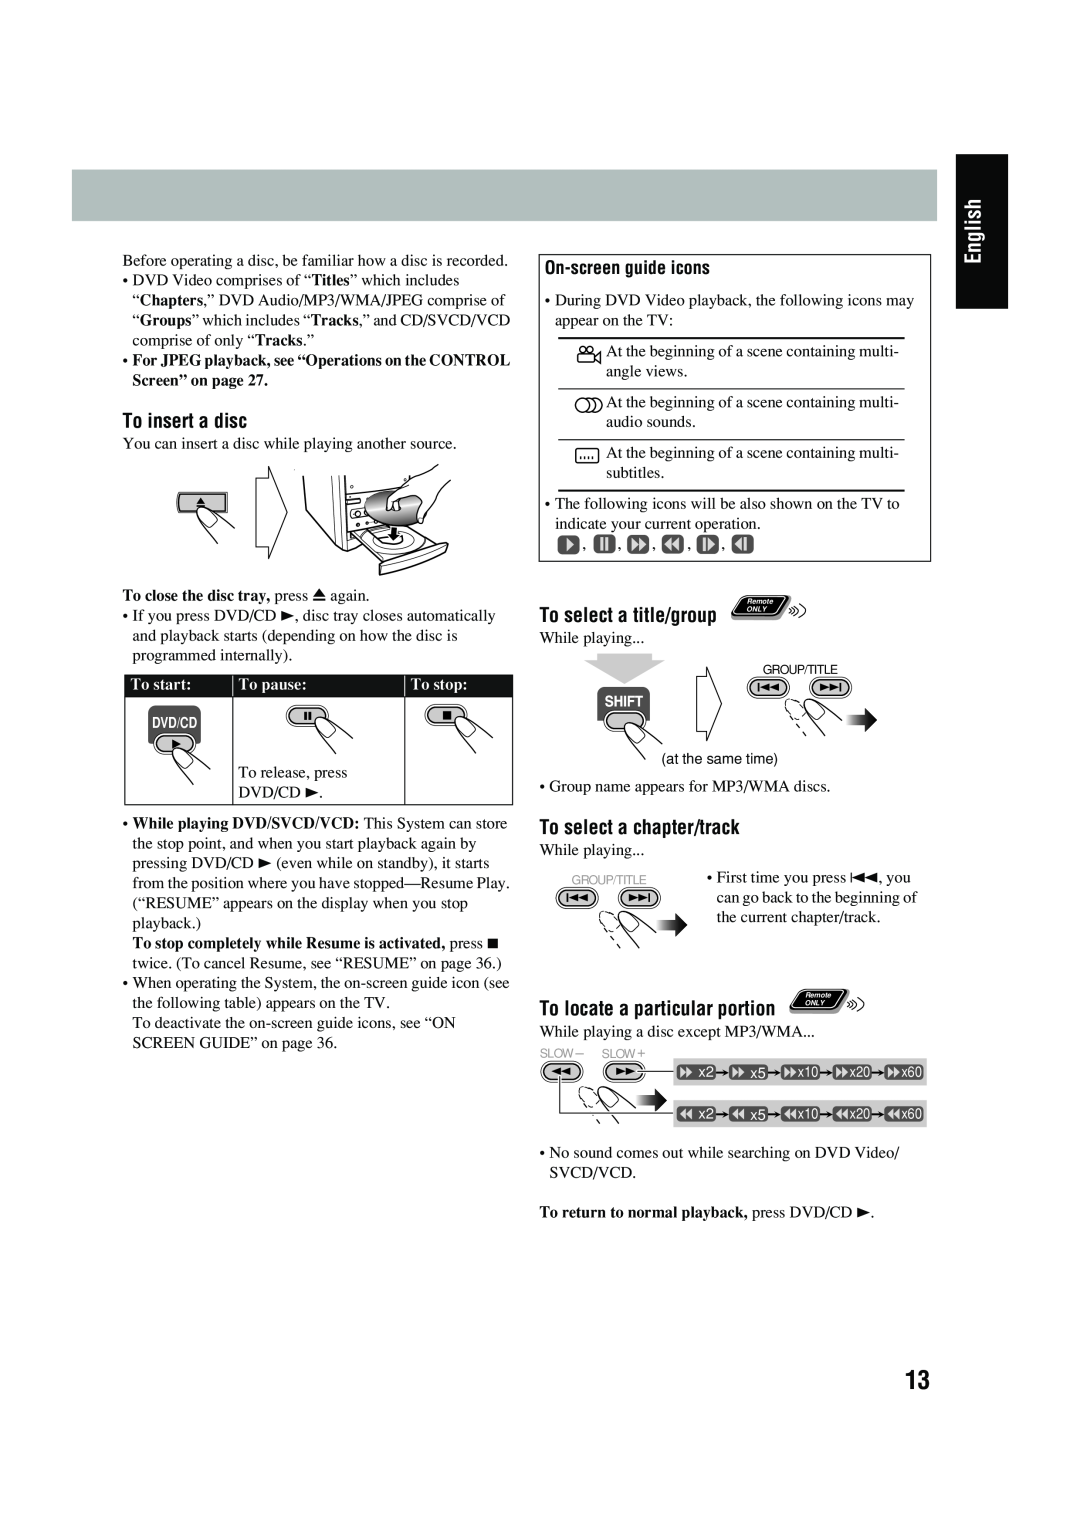 JVC UX-P450 manual English, To insert a disc, To select a chapter/track, On-screenguide icons, To select a title/group 